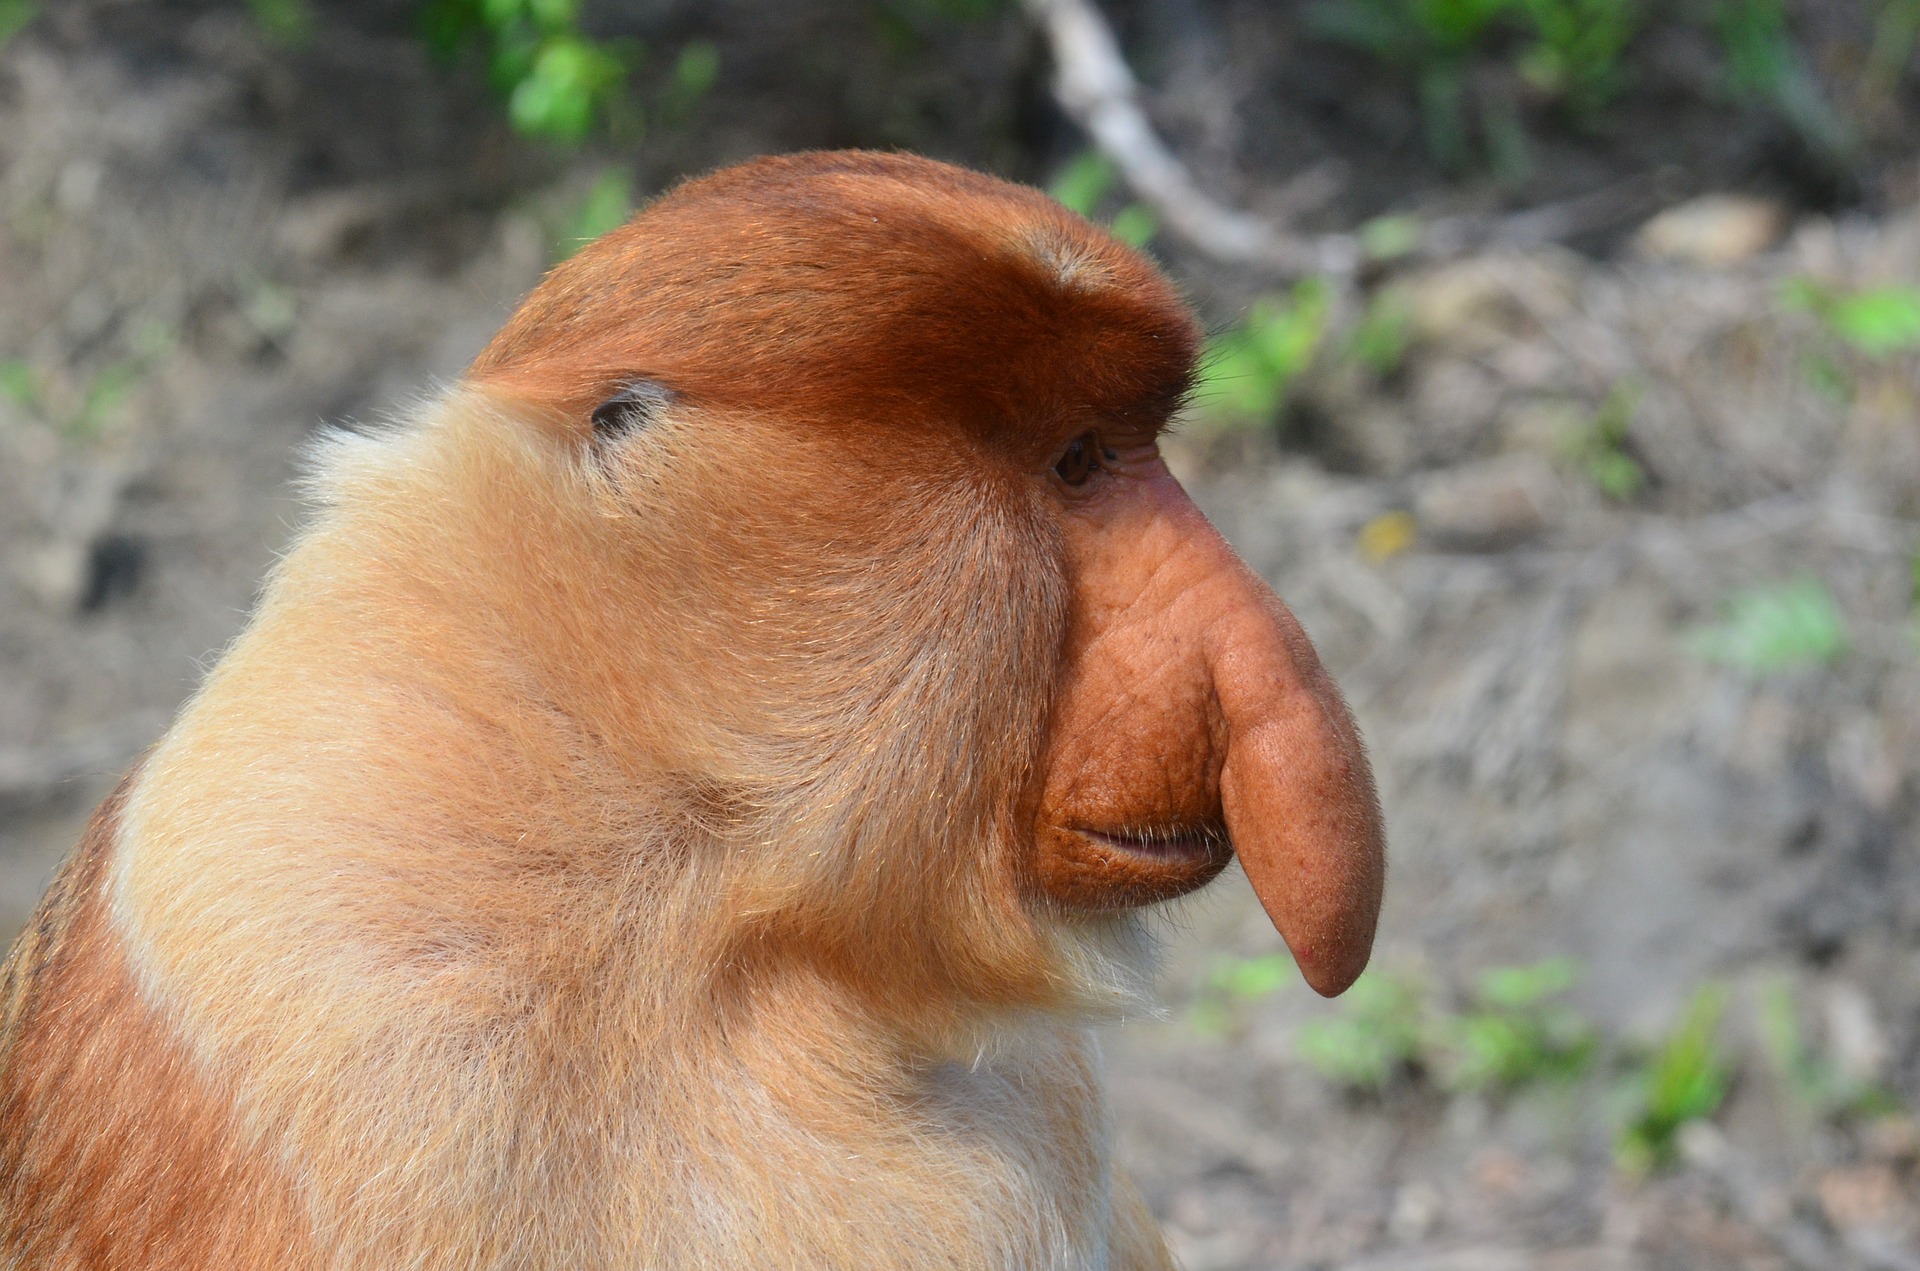 a close up of a monkey's face with trees in the background